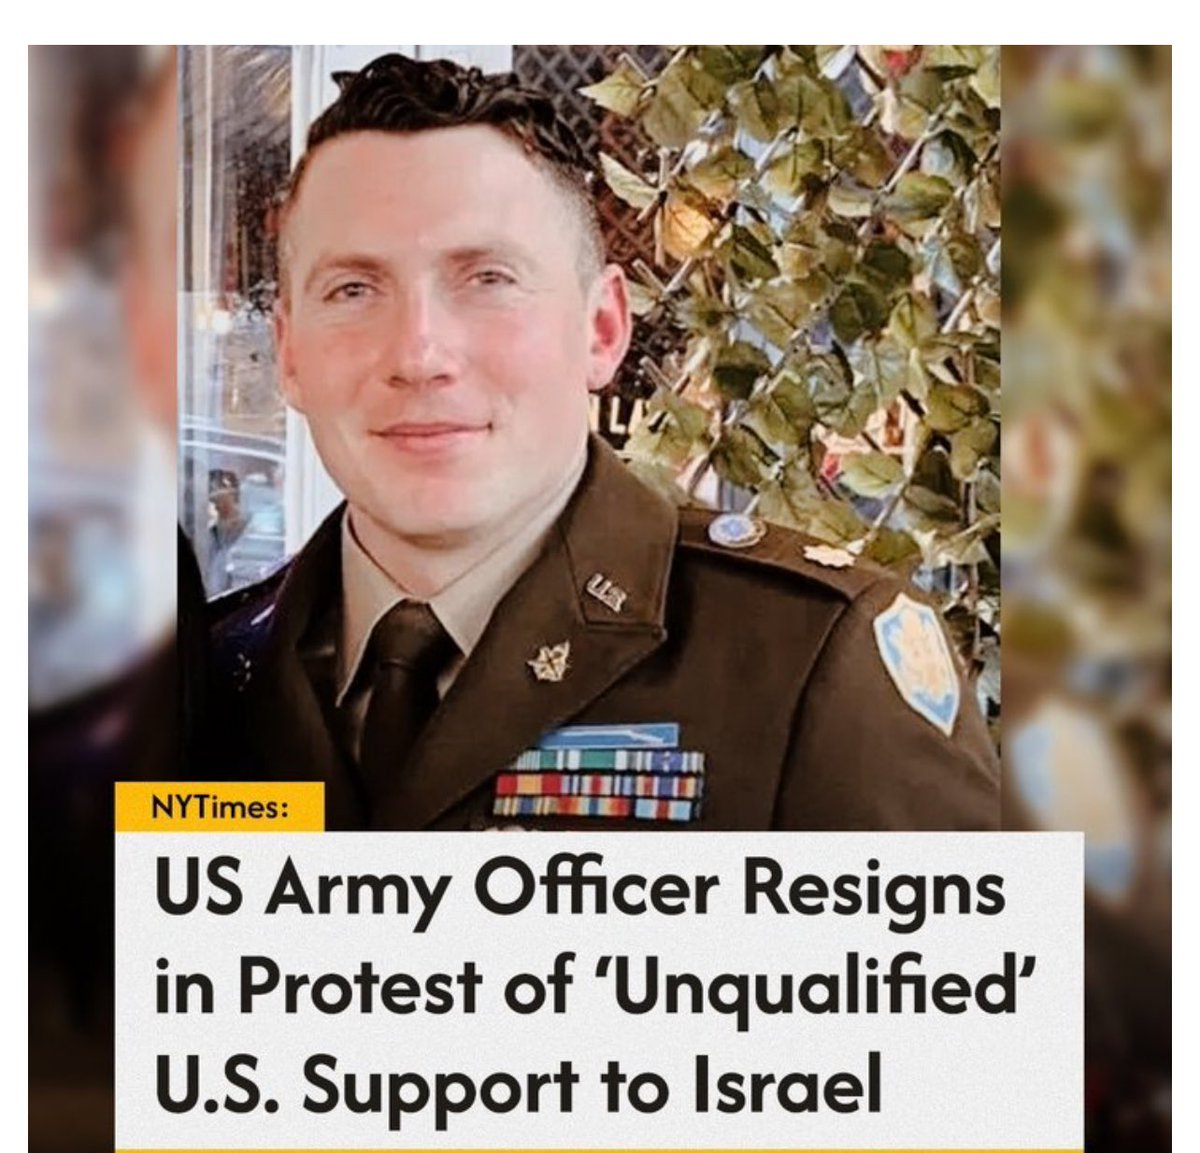 There is now a steady stream of govt resignations over Israel. Today it's Major Harrison Mann, former US military intel official. “At some point, you're either advancing a policy that enables the mass starvation of children, or you're not,' he said. Thank you Major Mann. May many